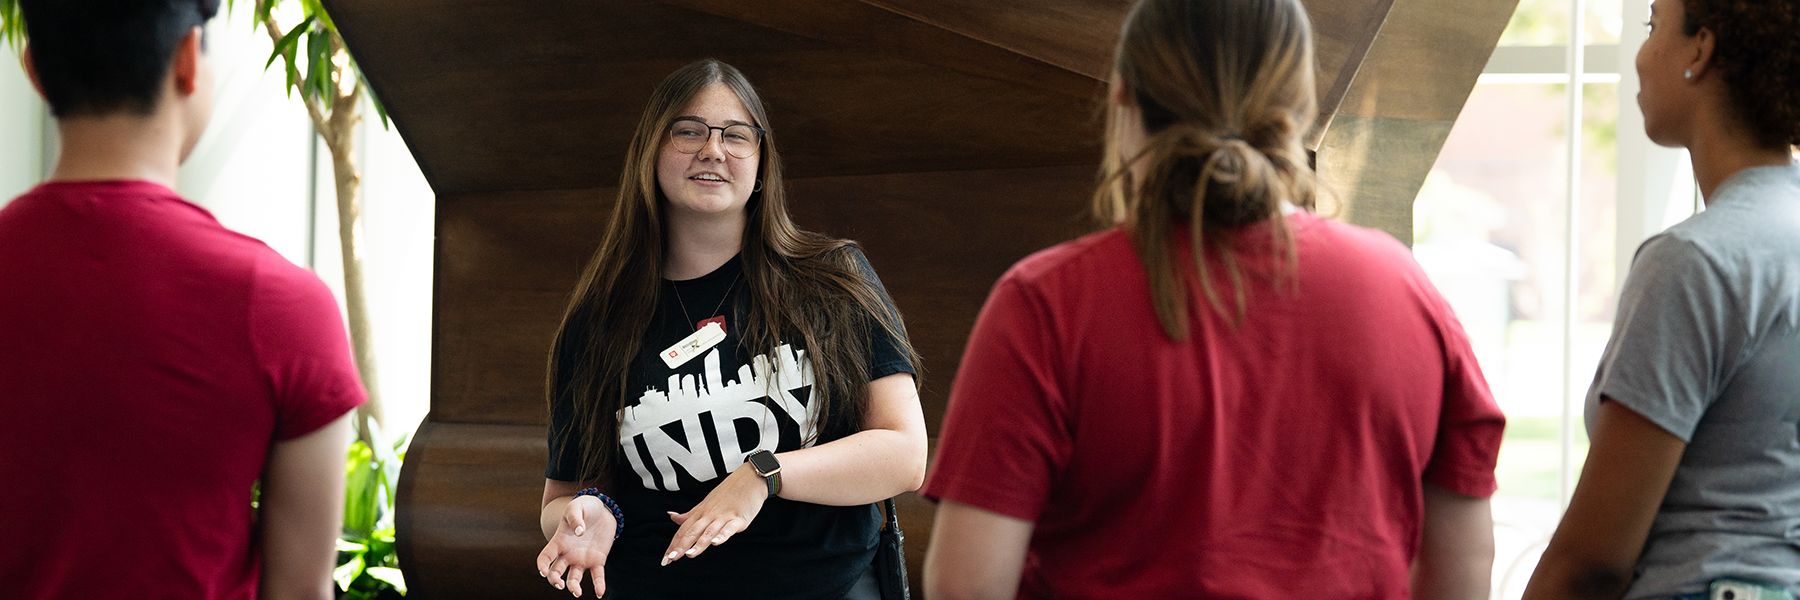 An IU Indianapolis student smiles and gestures with her hands while leading a tour of campus in front of the Punctuation Spire statue in the Campus Center to three prospective students who are facing her. She is wearing a black shirt that says INDY and has the IU trident in red.  The two students to the left are both wearing a red shirt, and the one on the right is wearing a grey shirt.